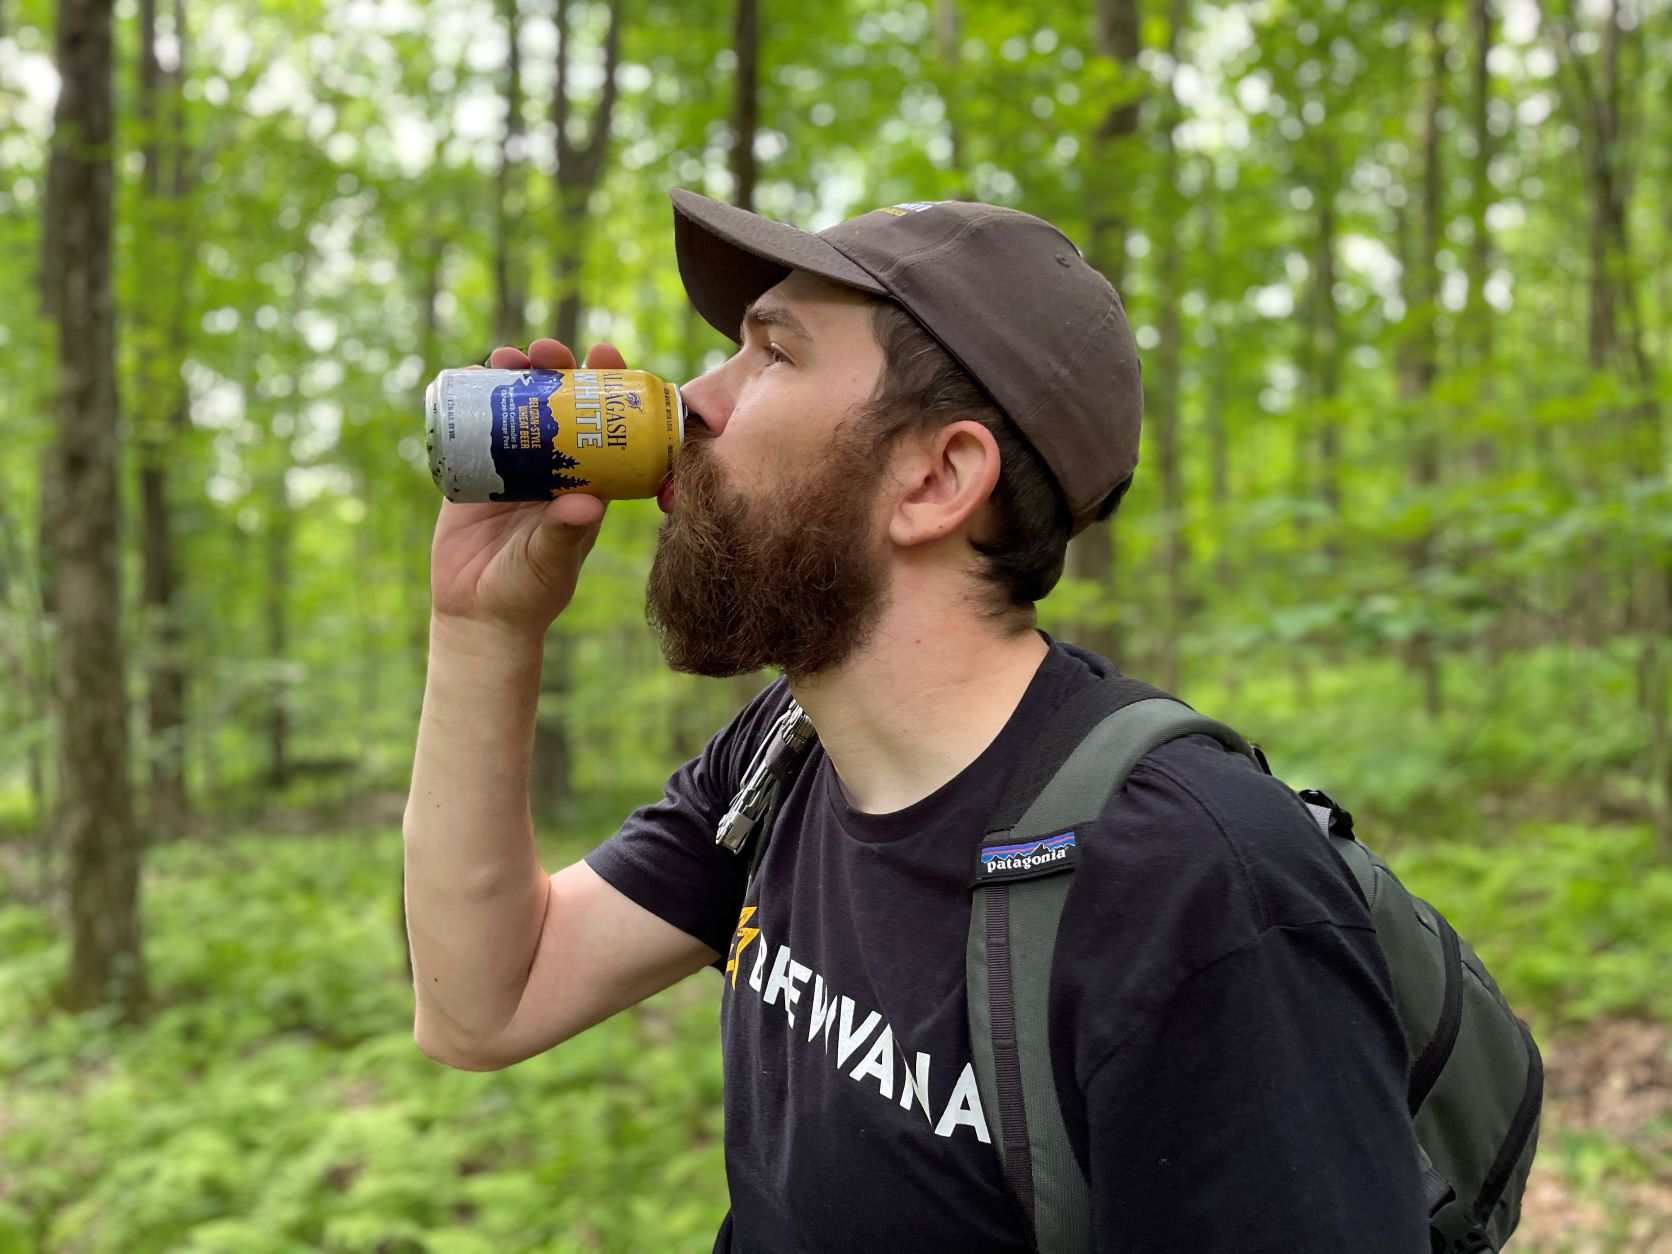 Brian Hatheway from the Brews Less Traveled Podcast enjoys his favorite summer beer